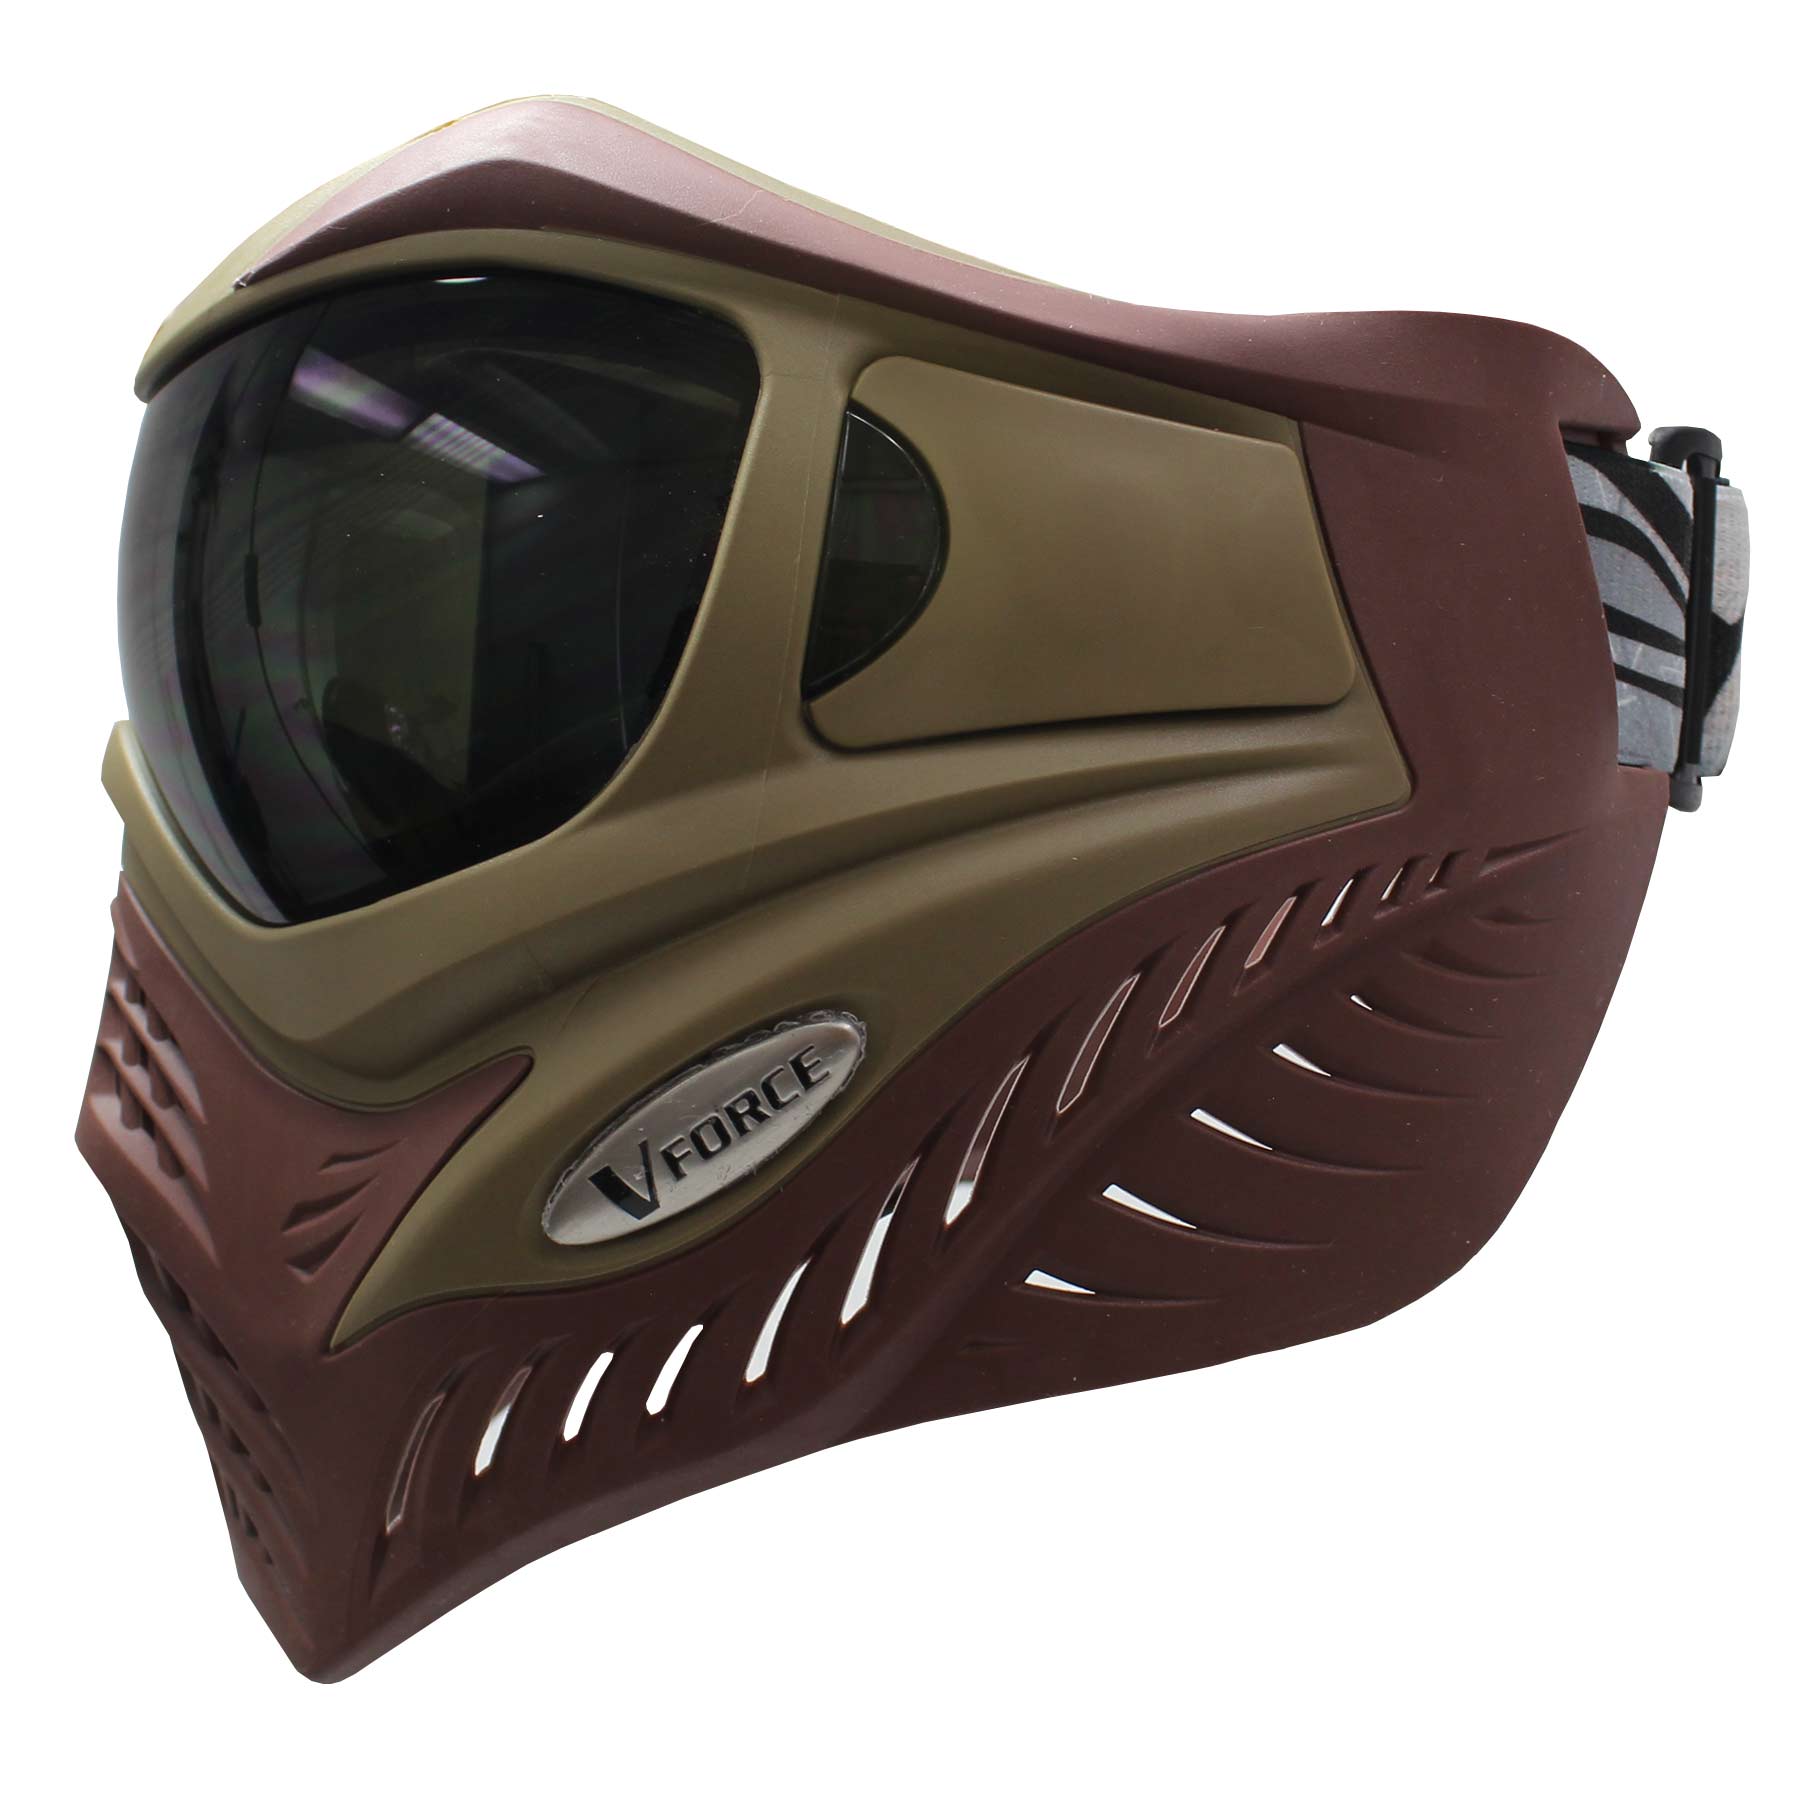 VForce Grill Mask Falcon - Tan on Brown - Eminent Paintball And Airsoft